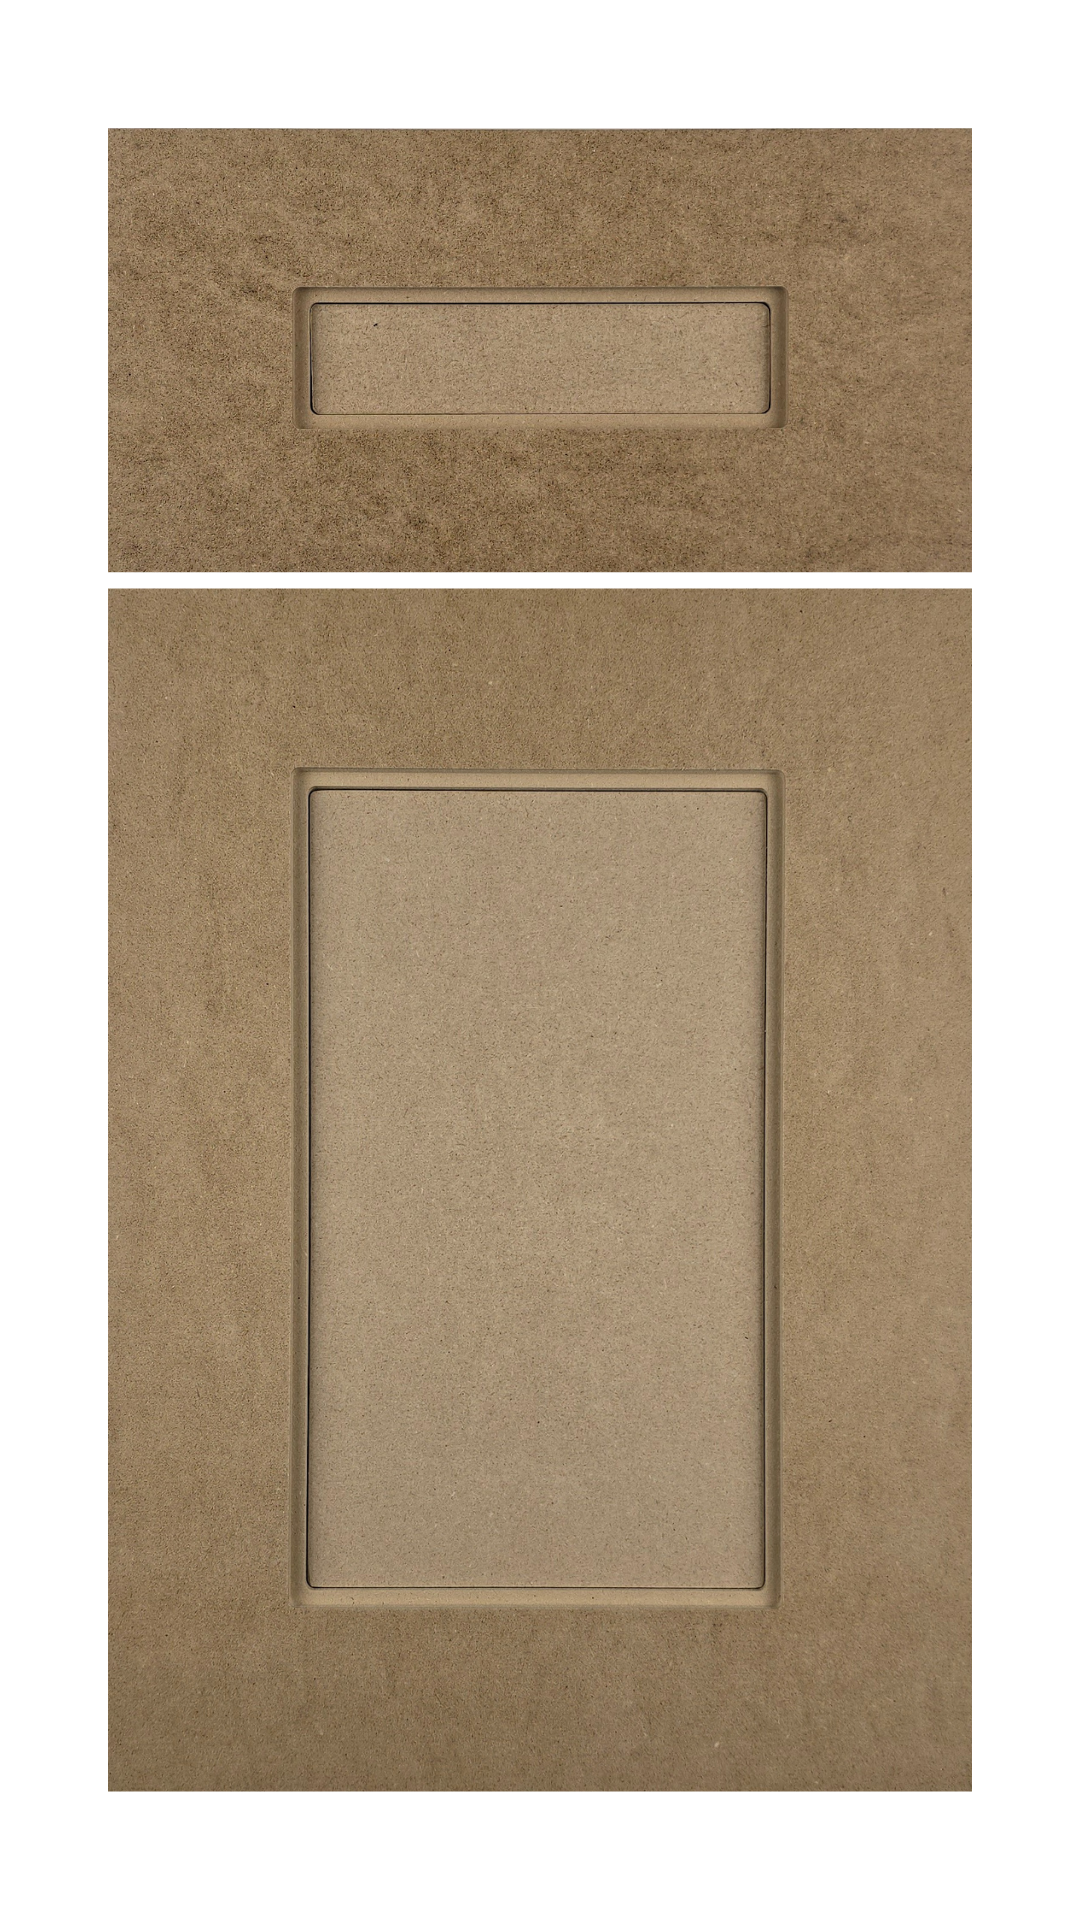 The Two Stepped Shaker cabinet door has a recessed panel. The inside profile has a ¼" step and round corners.